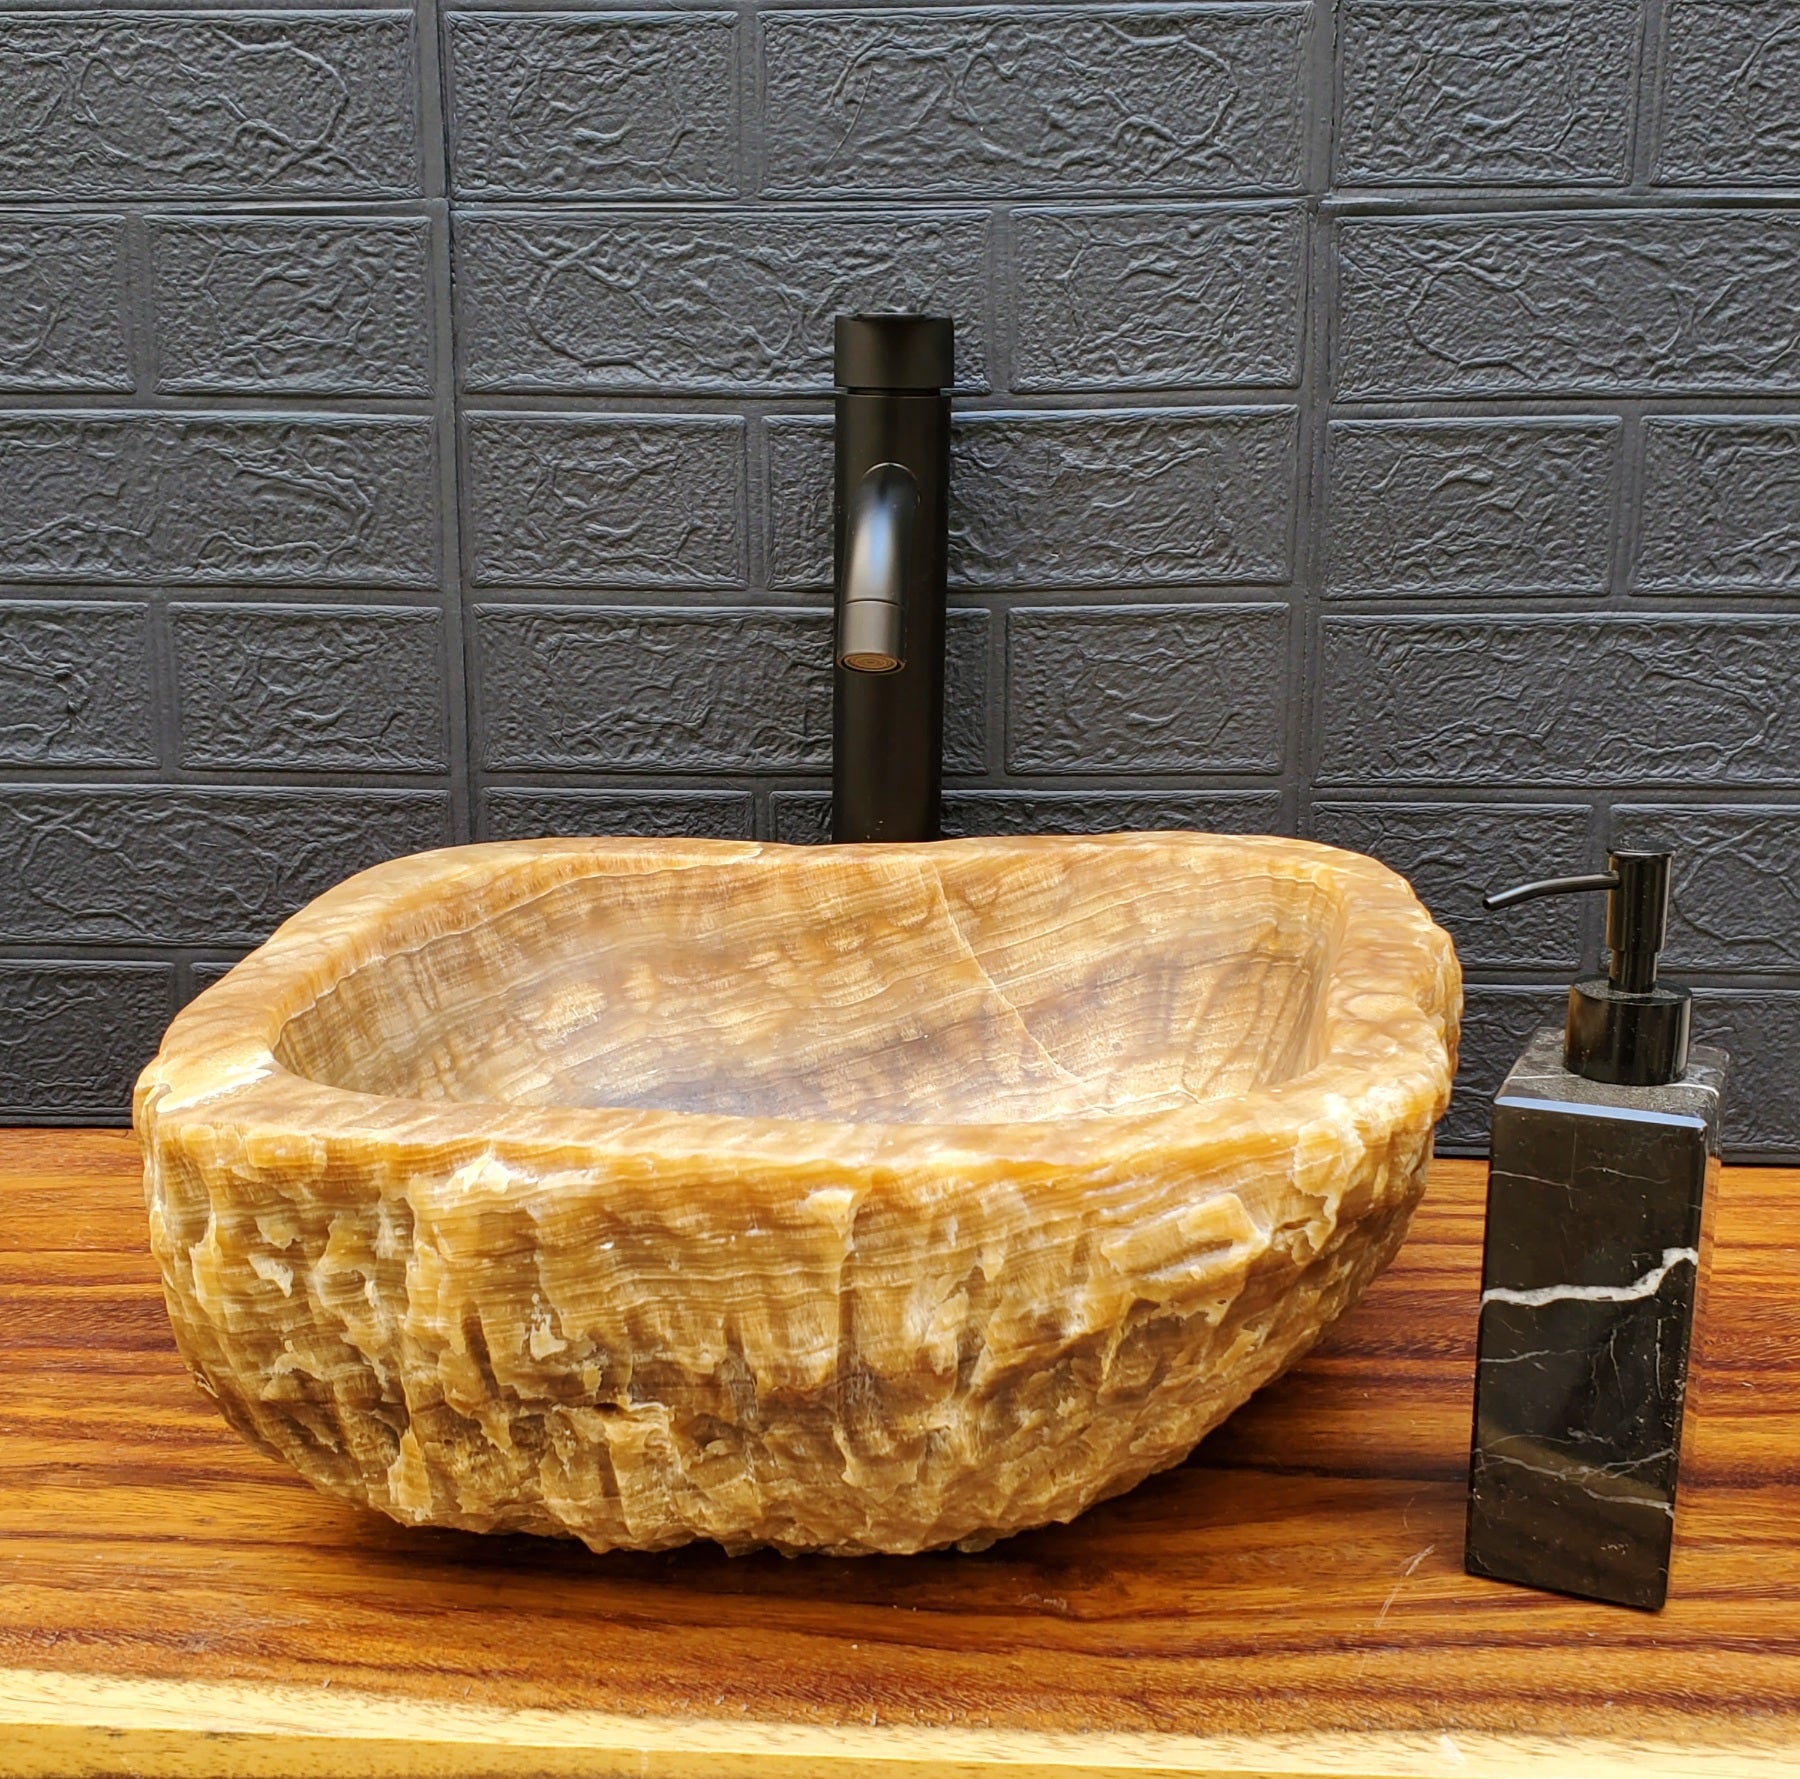 Brown Onyx Stone Bathroom Vessel Sink, Above Counter Sink, Handmade in Mexico. Hand Finished in USA. Buy now at www.felipeandgrace.com. 